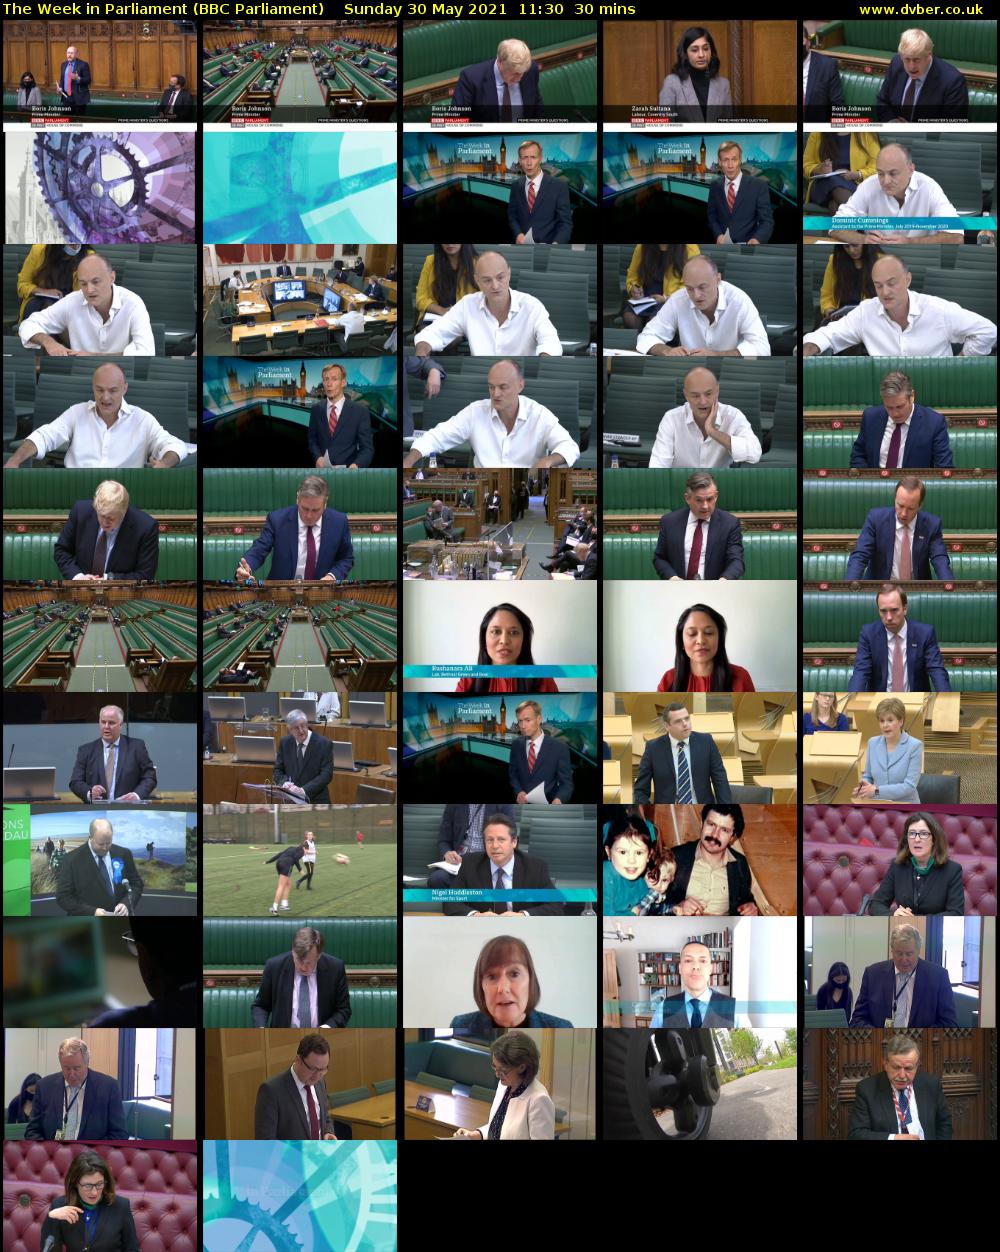 The Week in Parliament (BBC Parliament) Sunday 30 May 2021 11:30 - 12:00